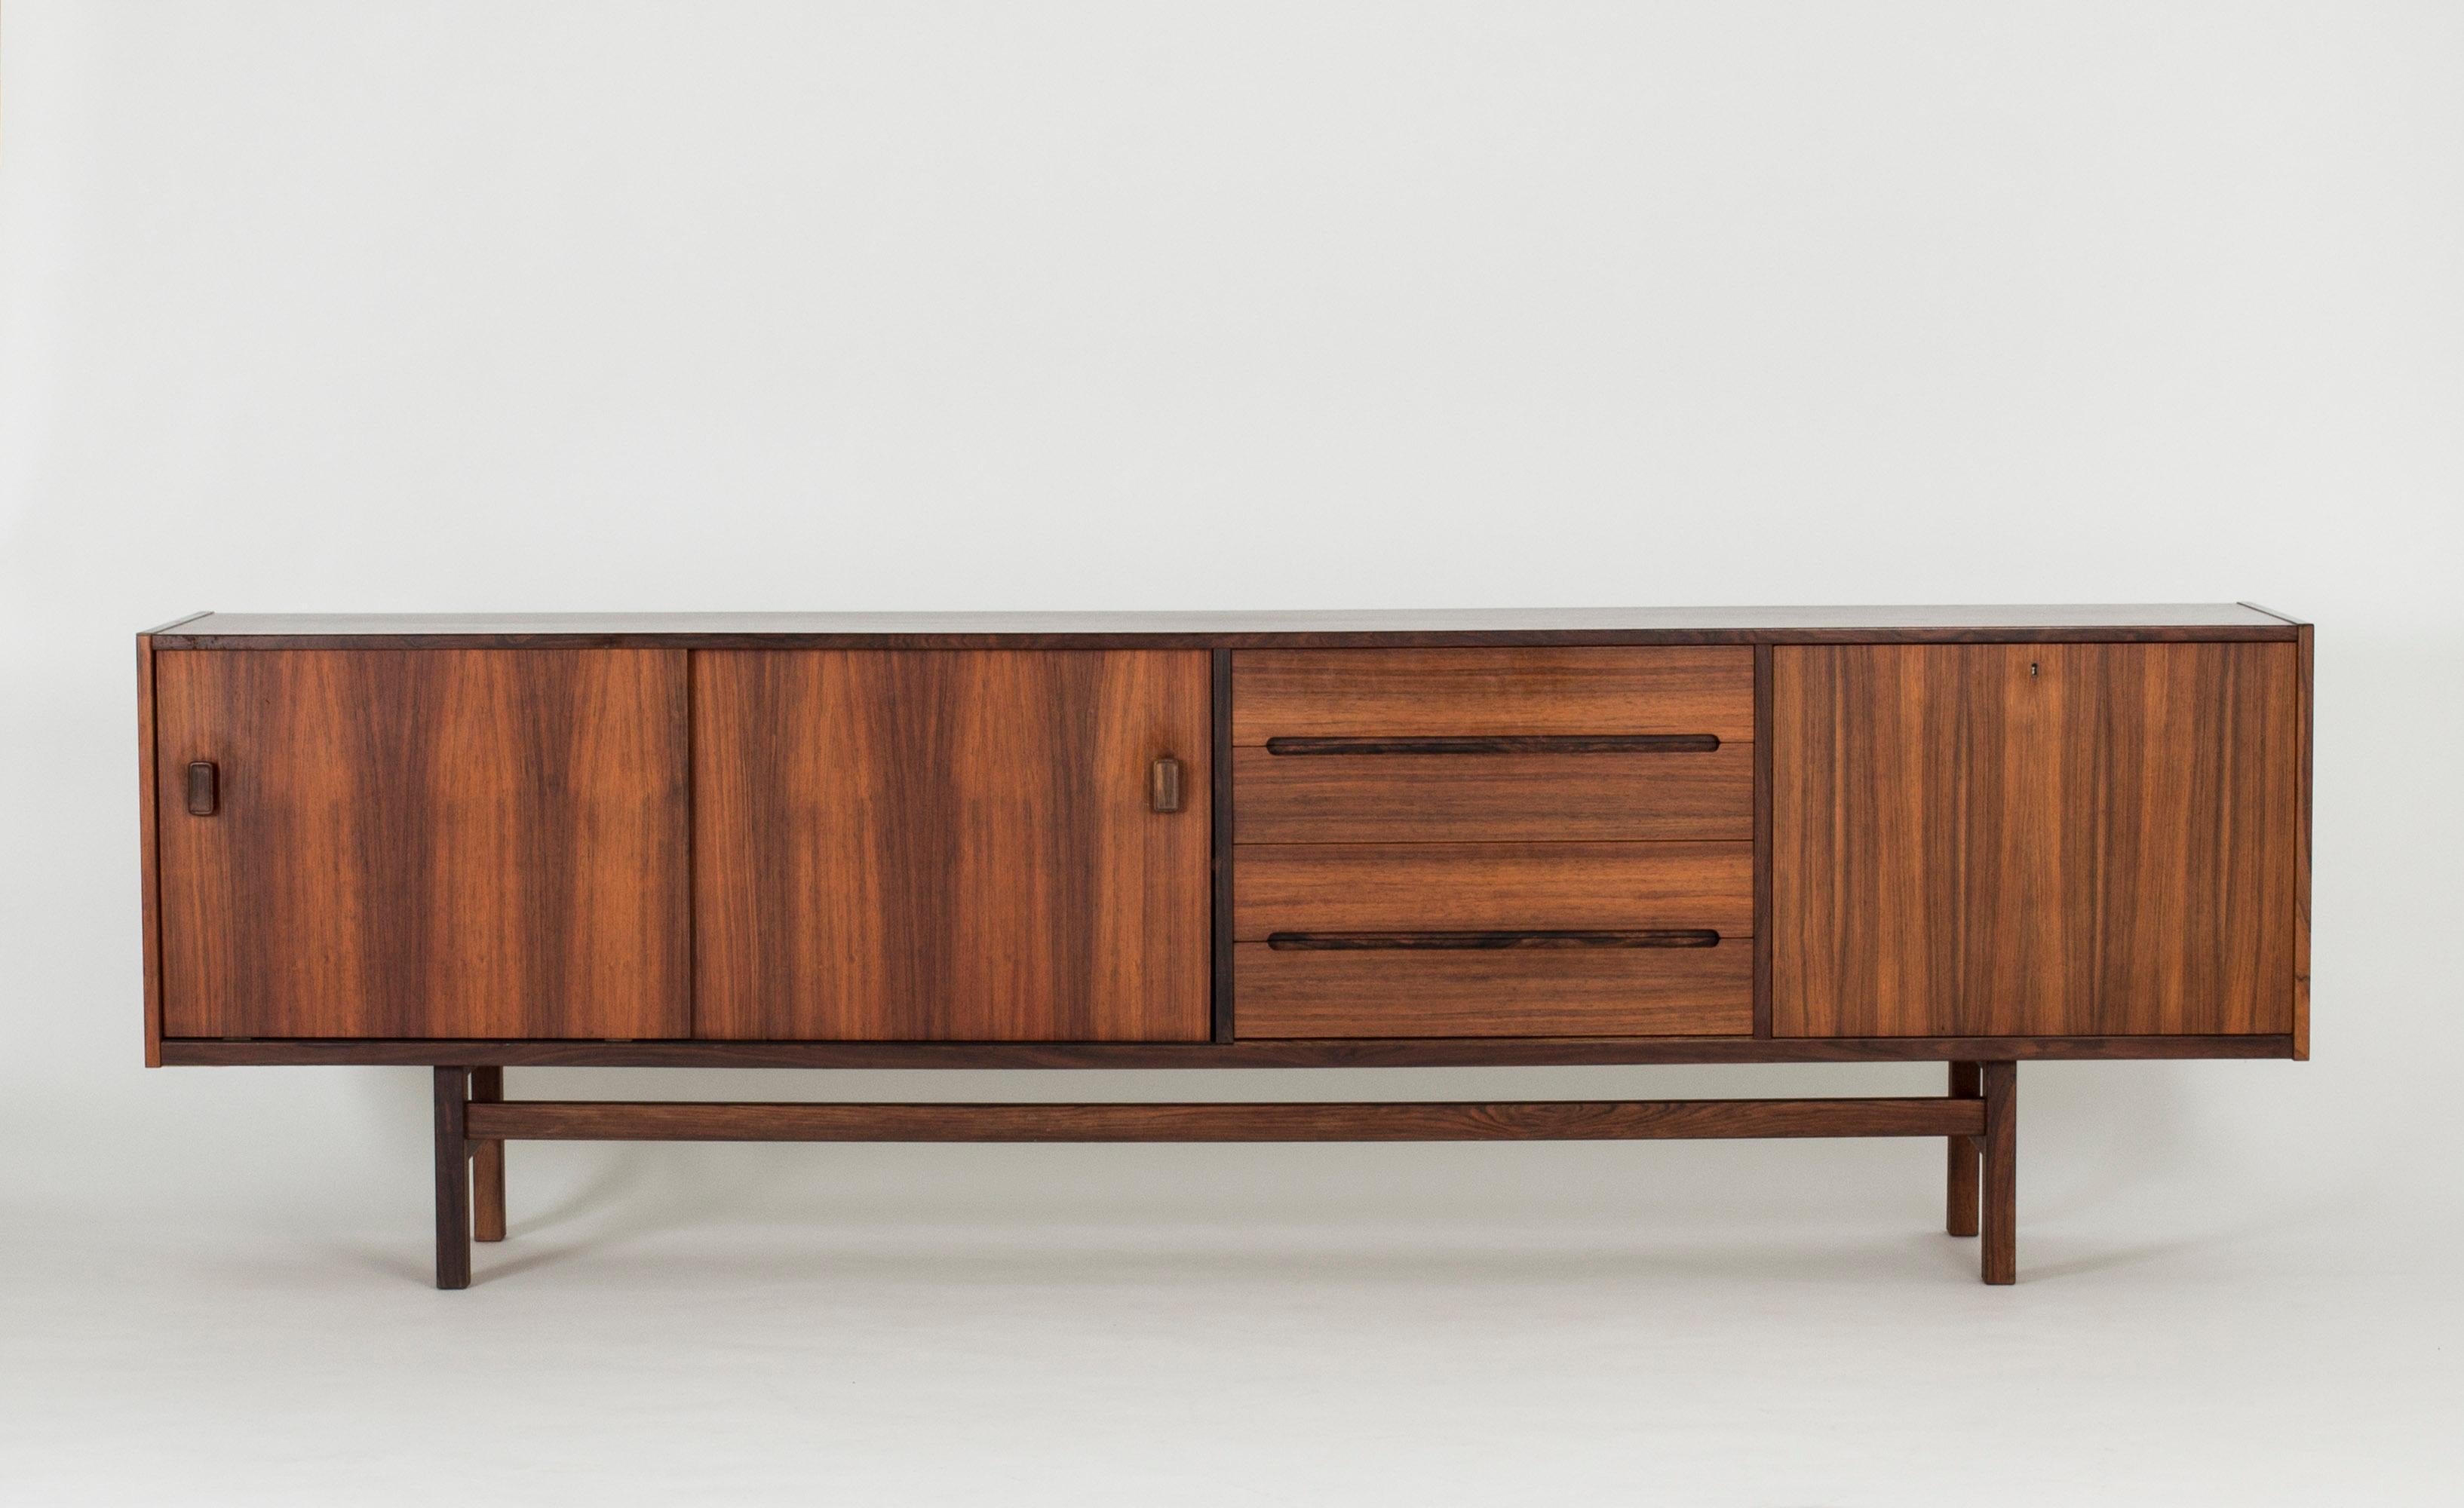 Striking rosewood sideboard by Nils Jonsson. Beautifully sculpted handles and veneer laid in contrasting directions. The door to the right opens up to a bar shelf inside.